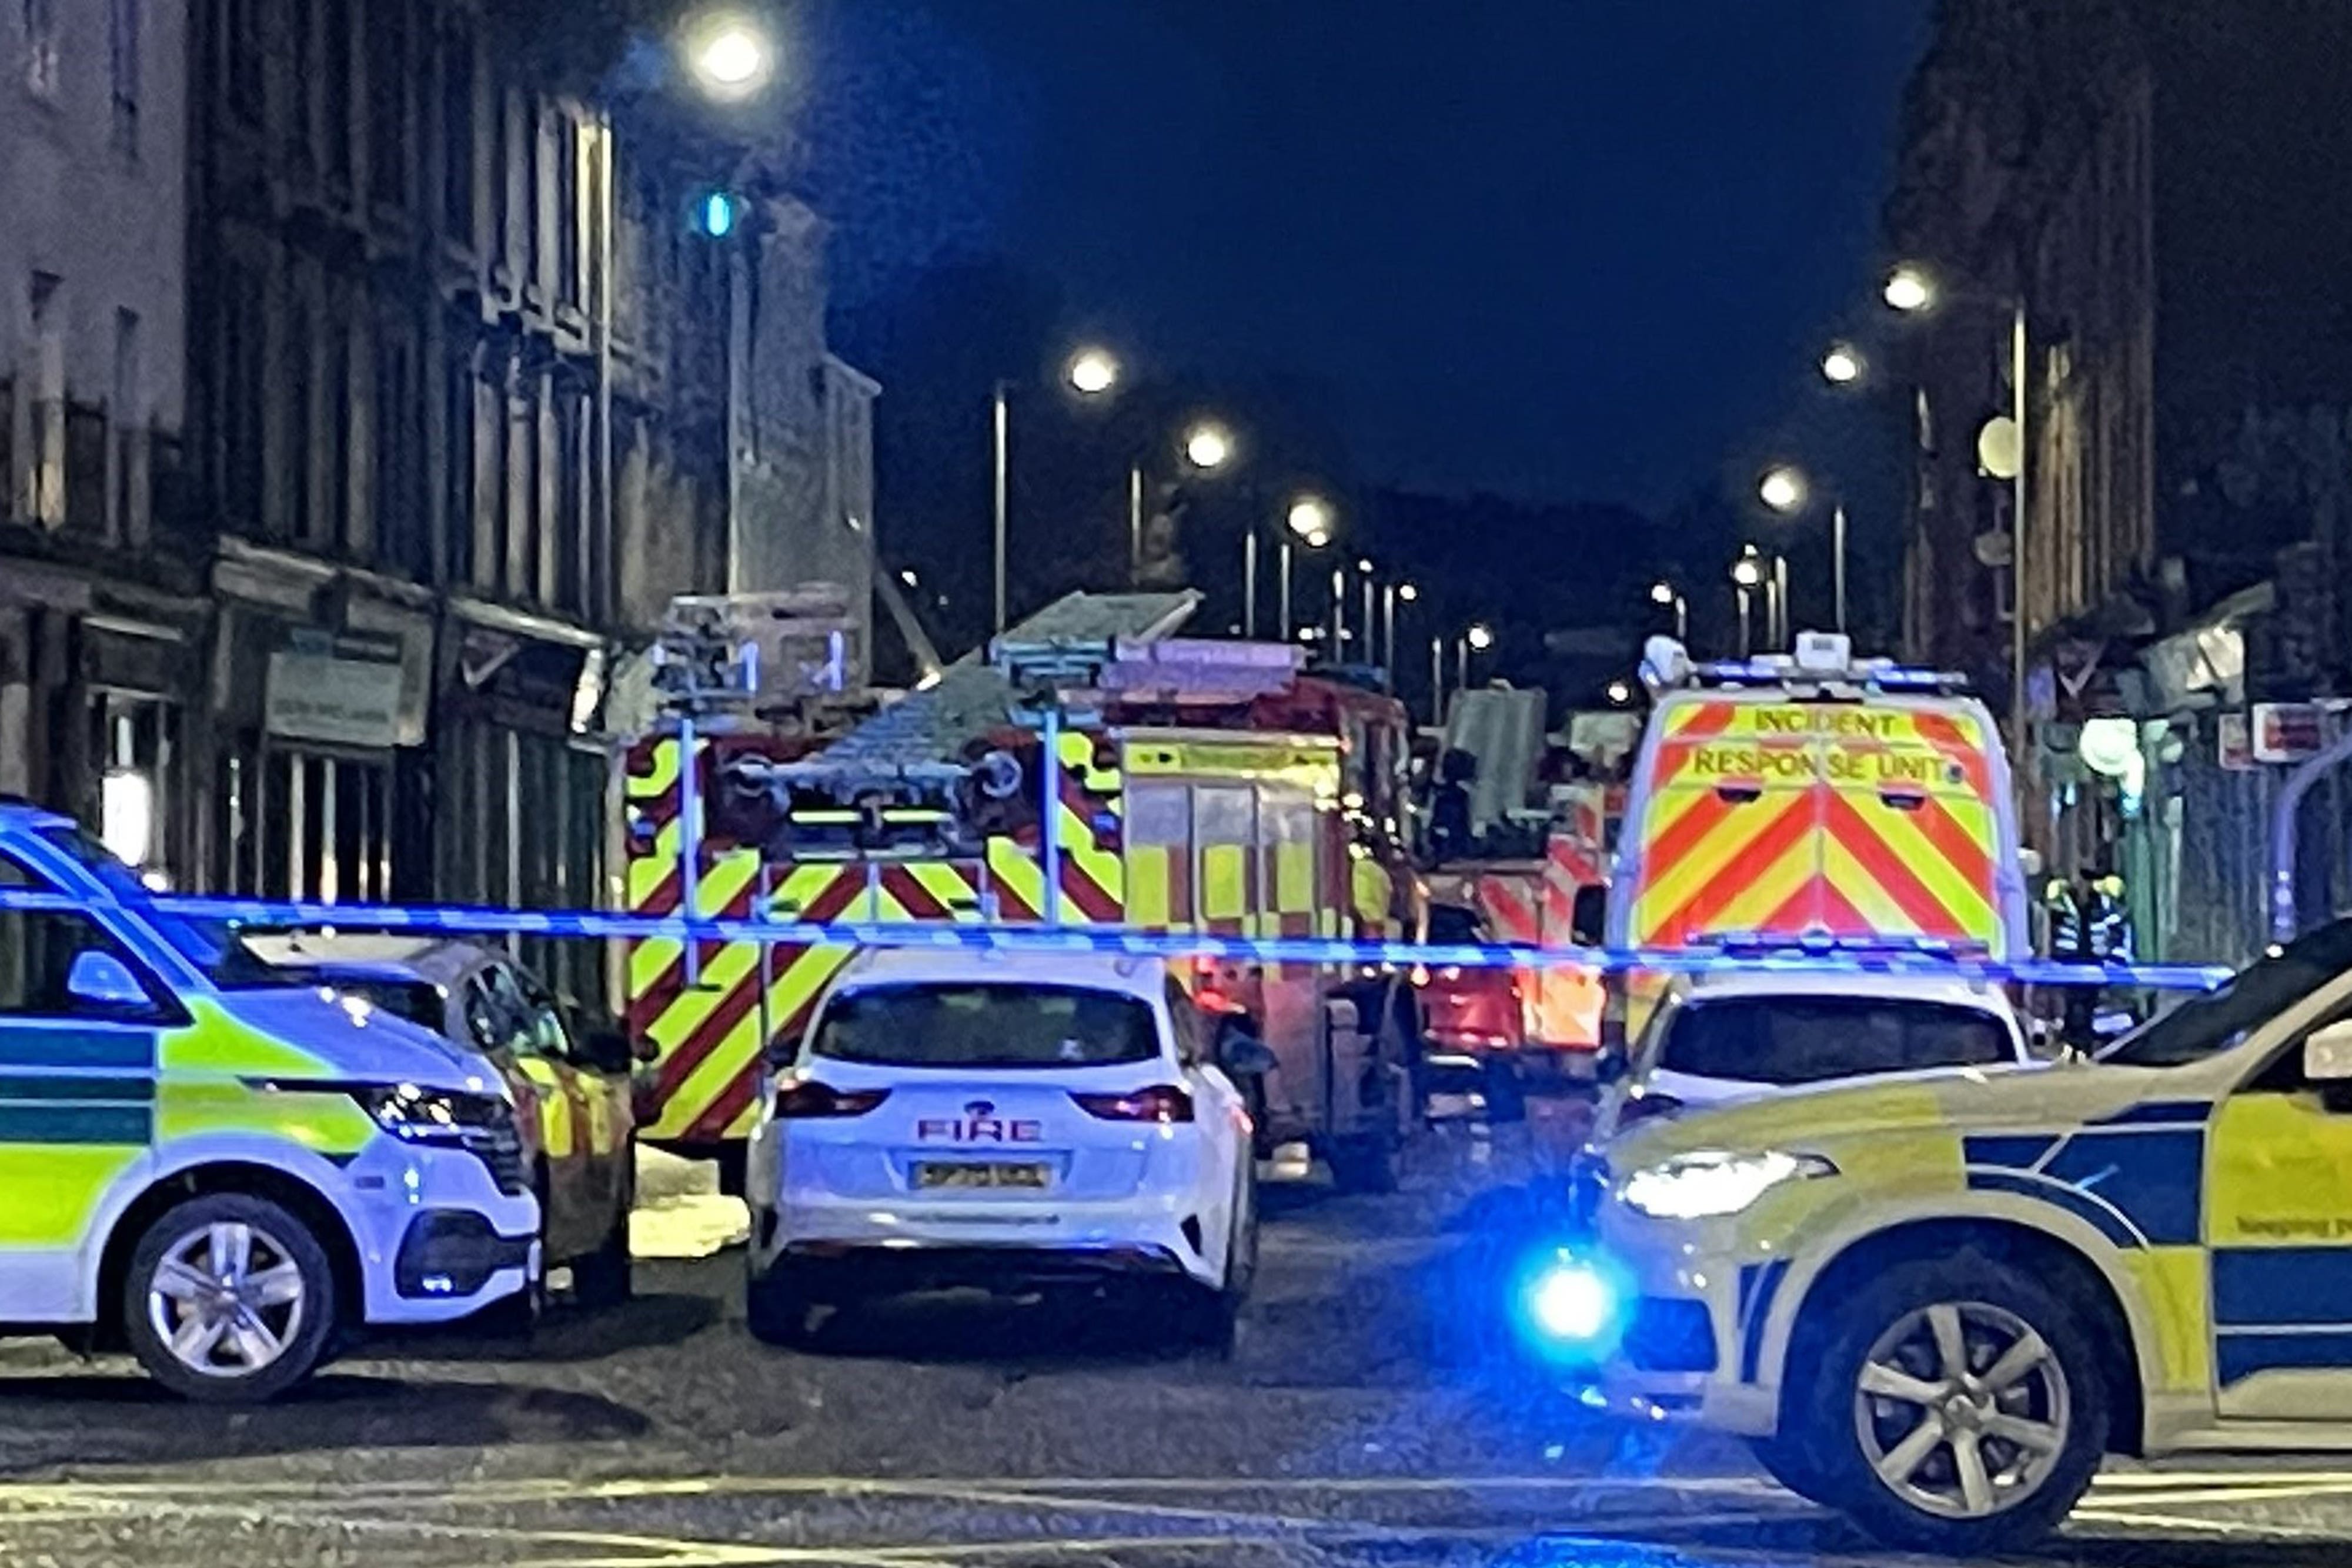 Emergency services at the scene after the early-morning blaze began